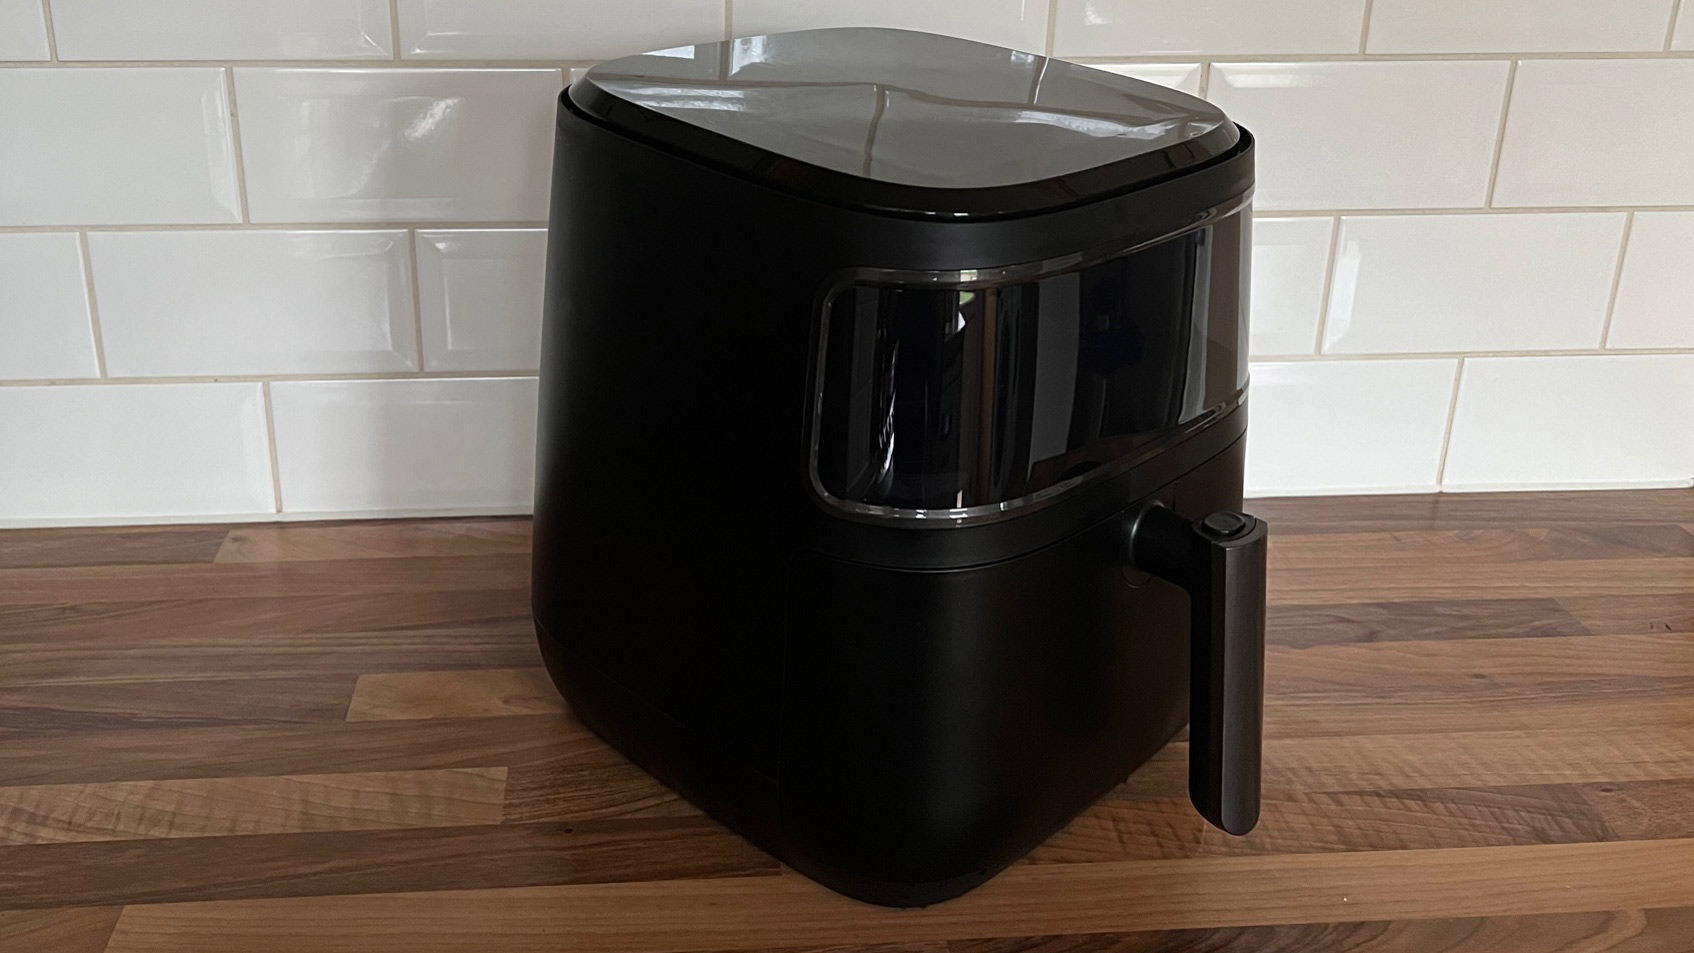 The side view of the Dreo 6-Quart Air Fryer